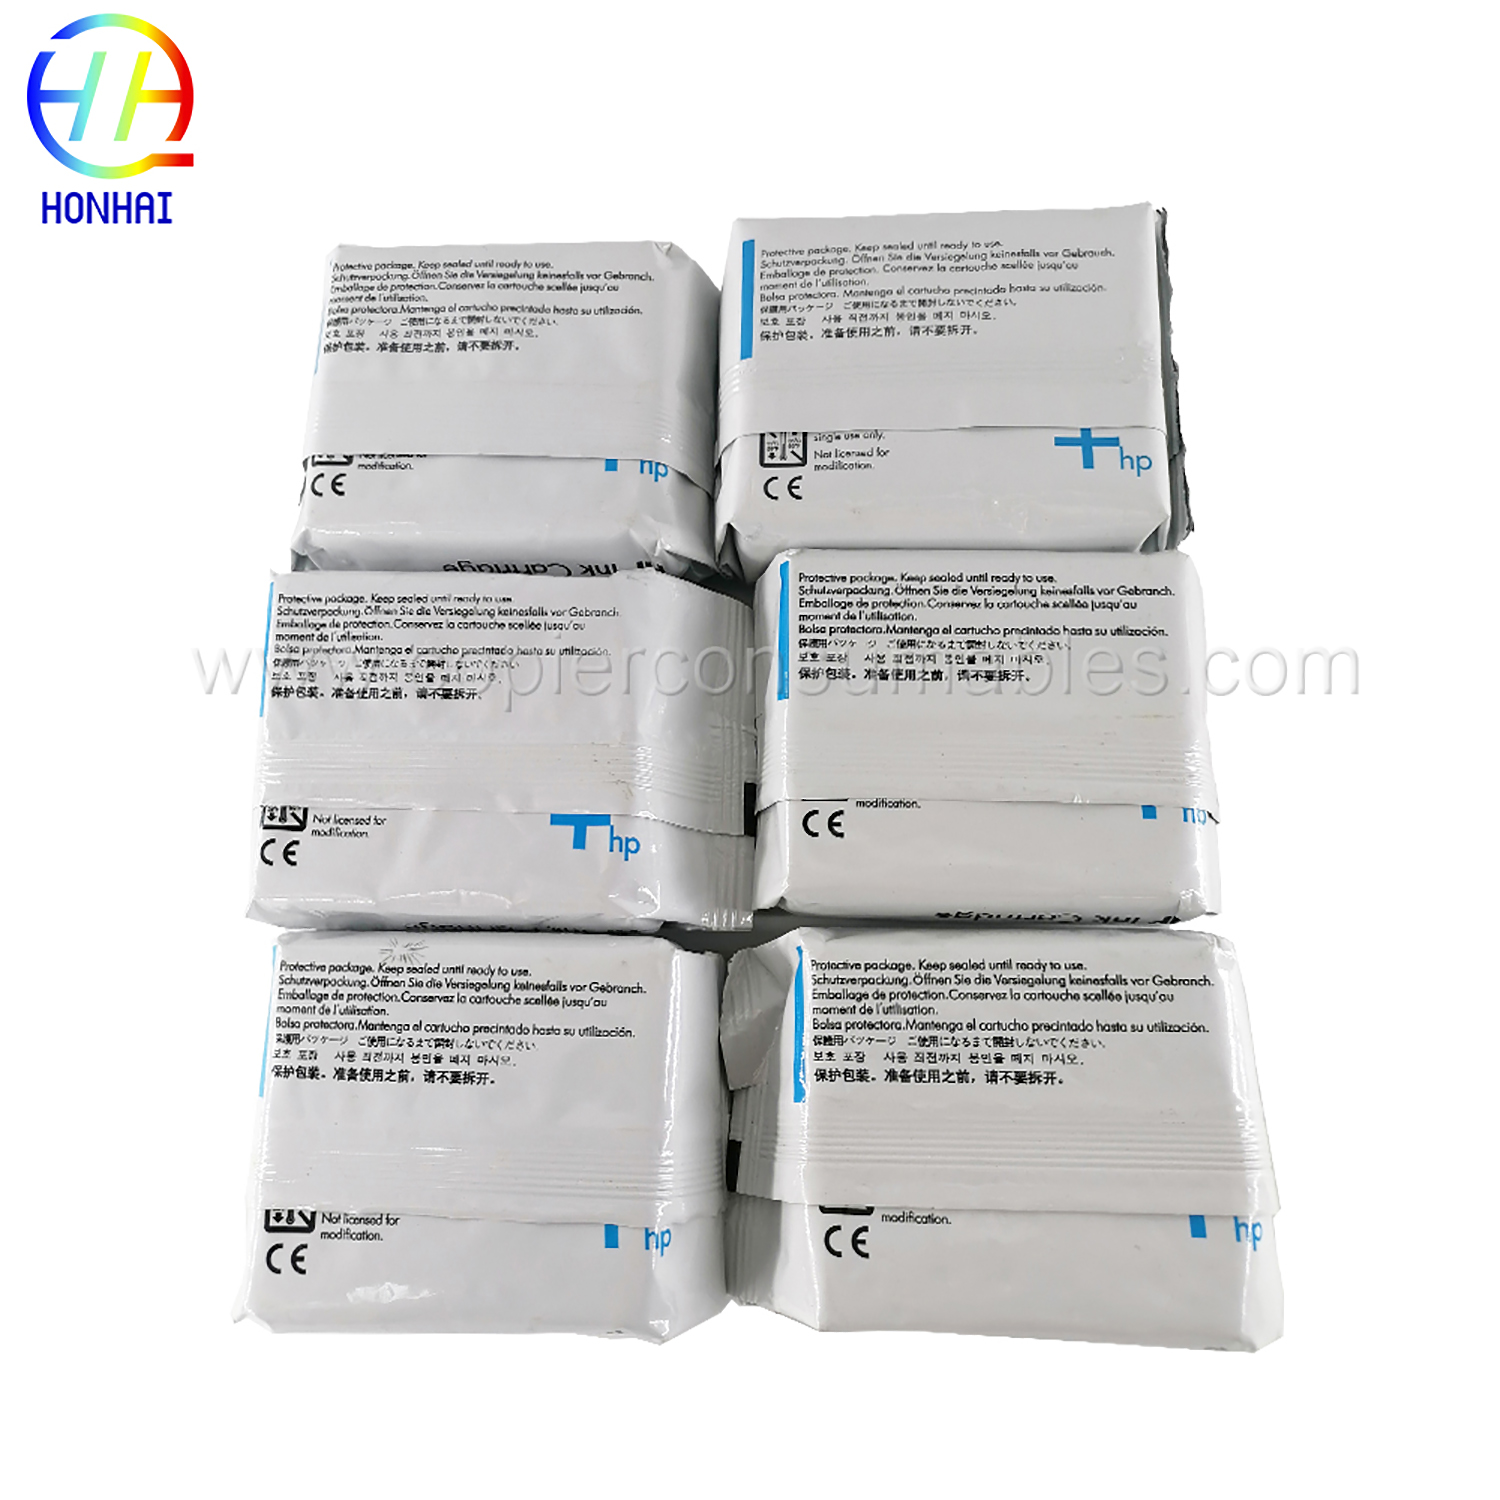 HP 10 C4844A (2) Ink سىياھ كارتىرىج قارا